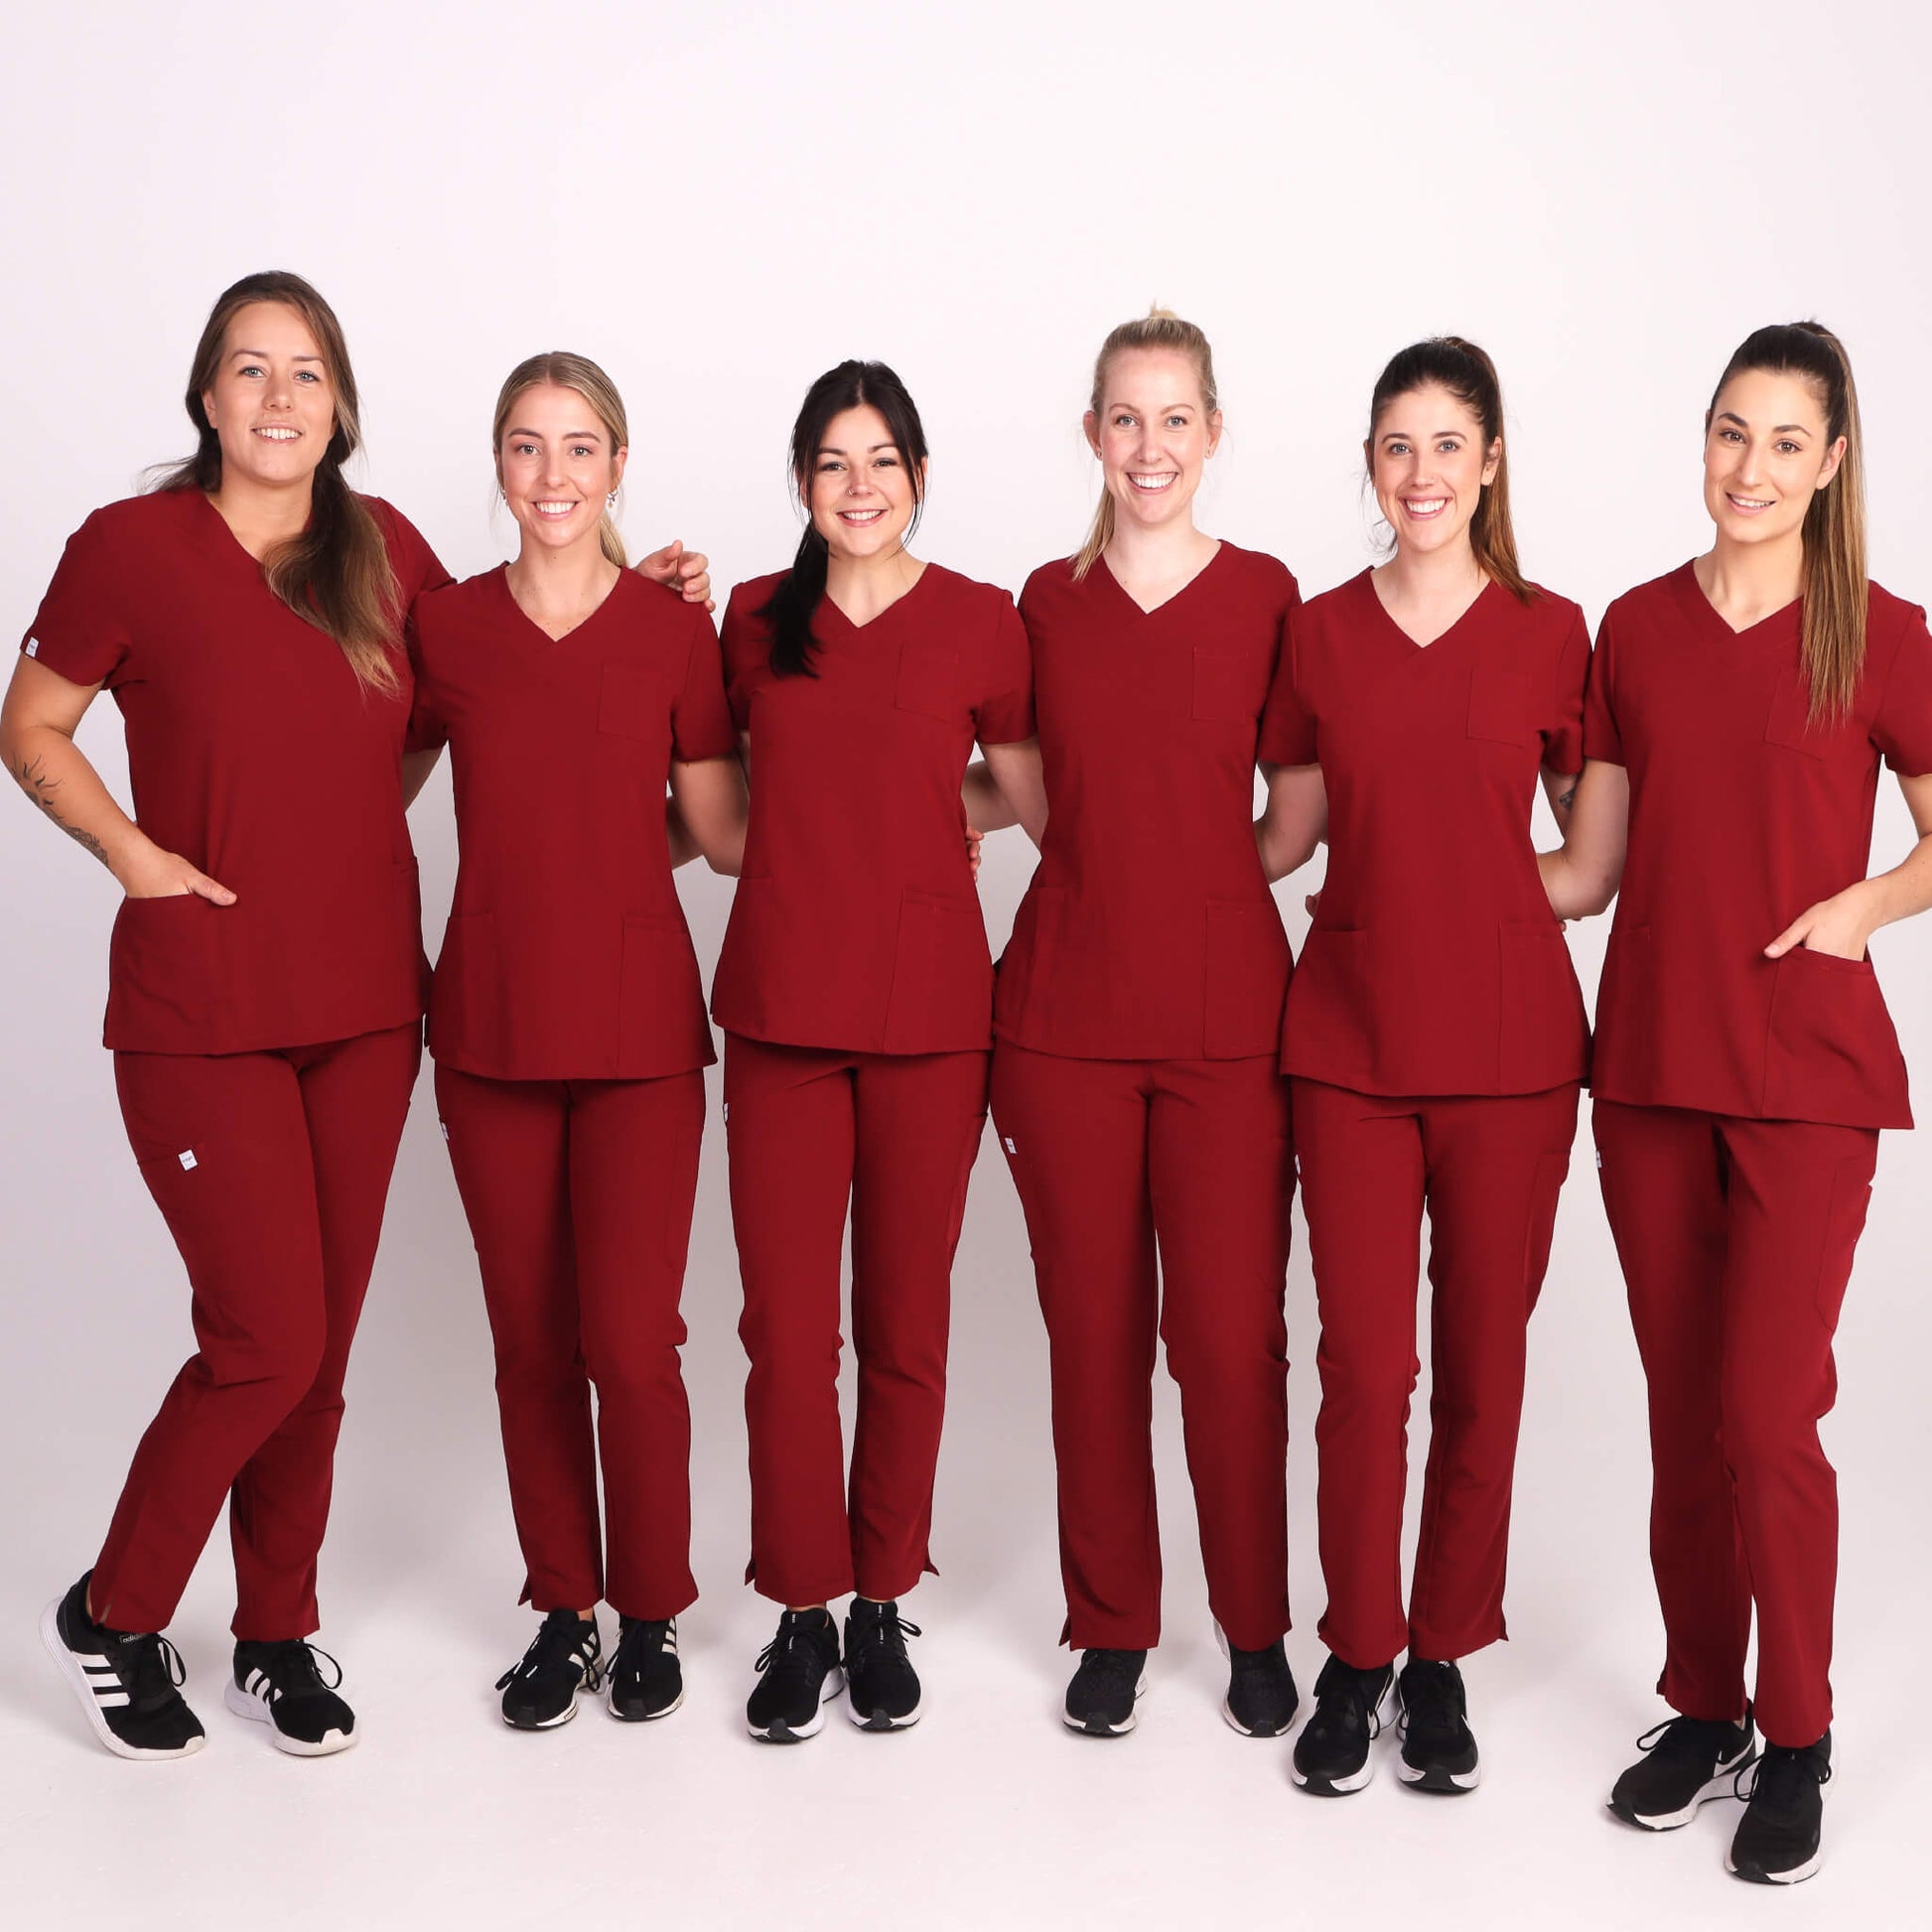 Nurse wearing Burgundy Medical Scrub Set by Fit Right Medical Scrubs. Available online near you today.